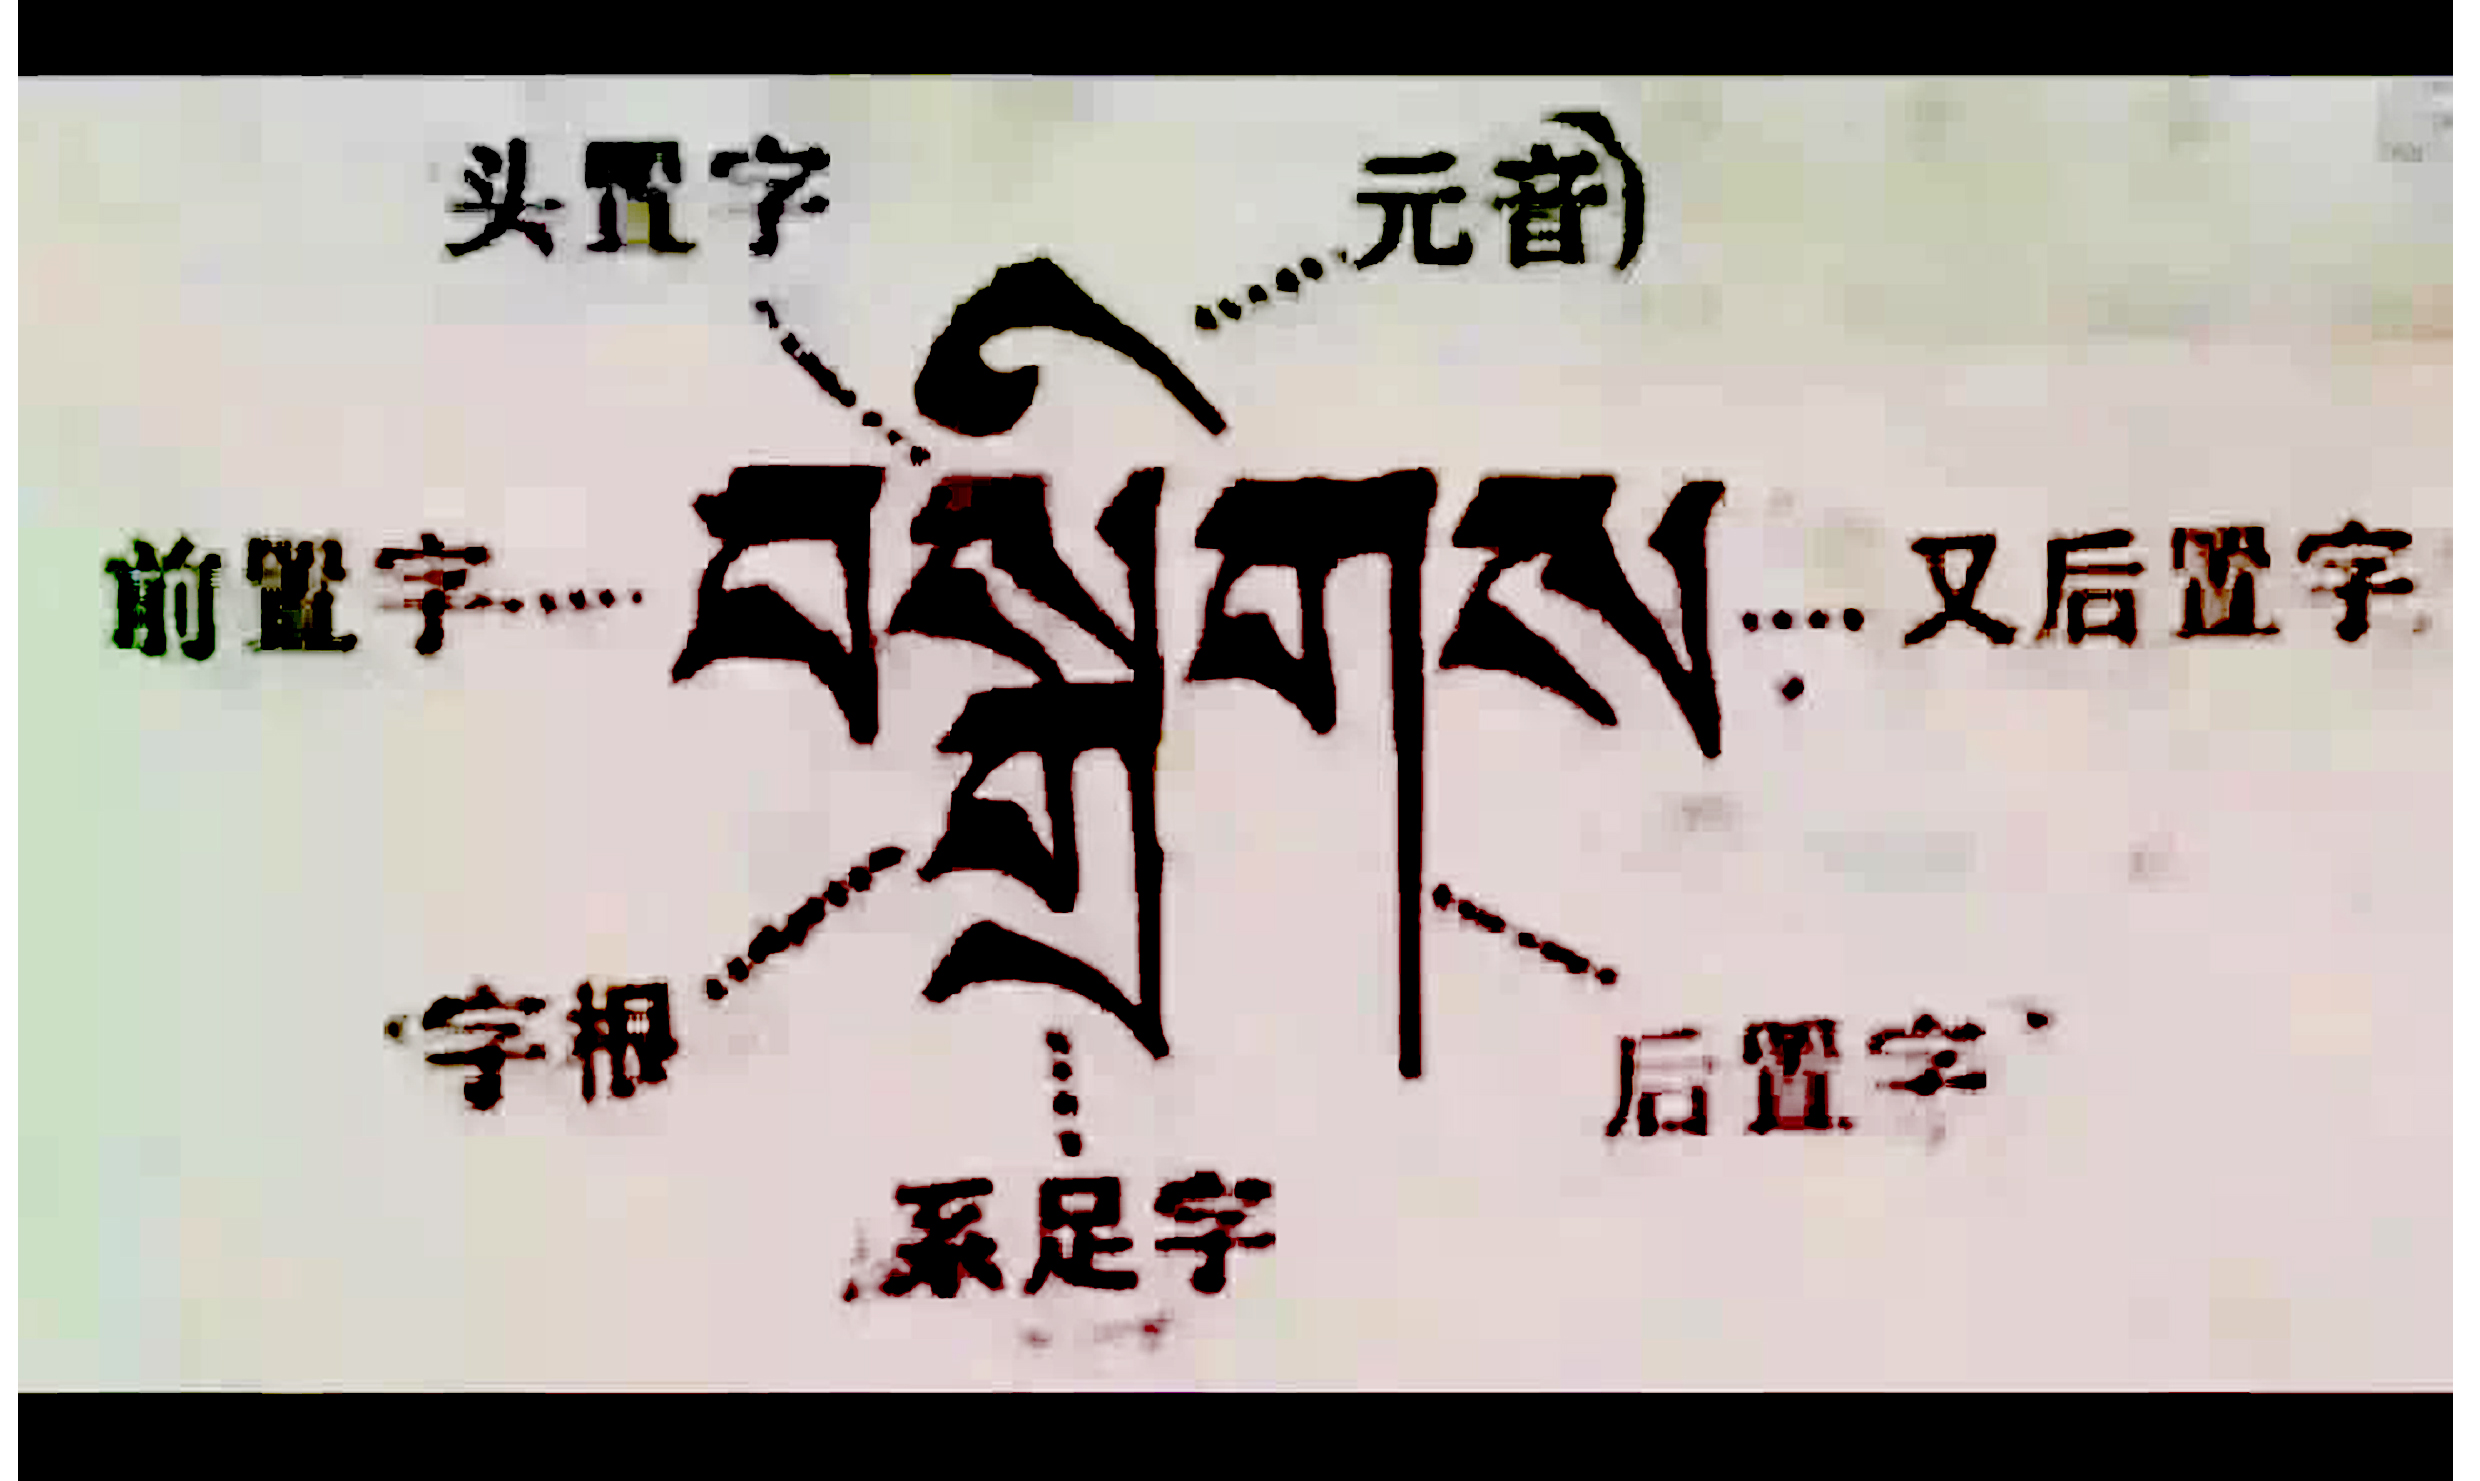 A photo of Tibetan word construction explained in Chinese